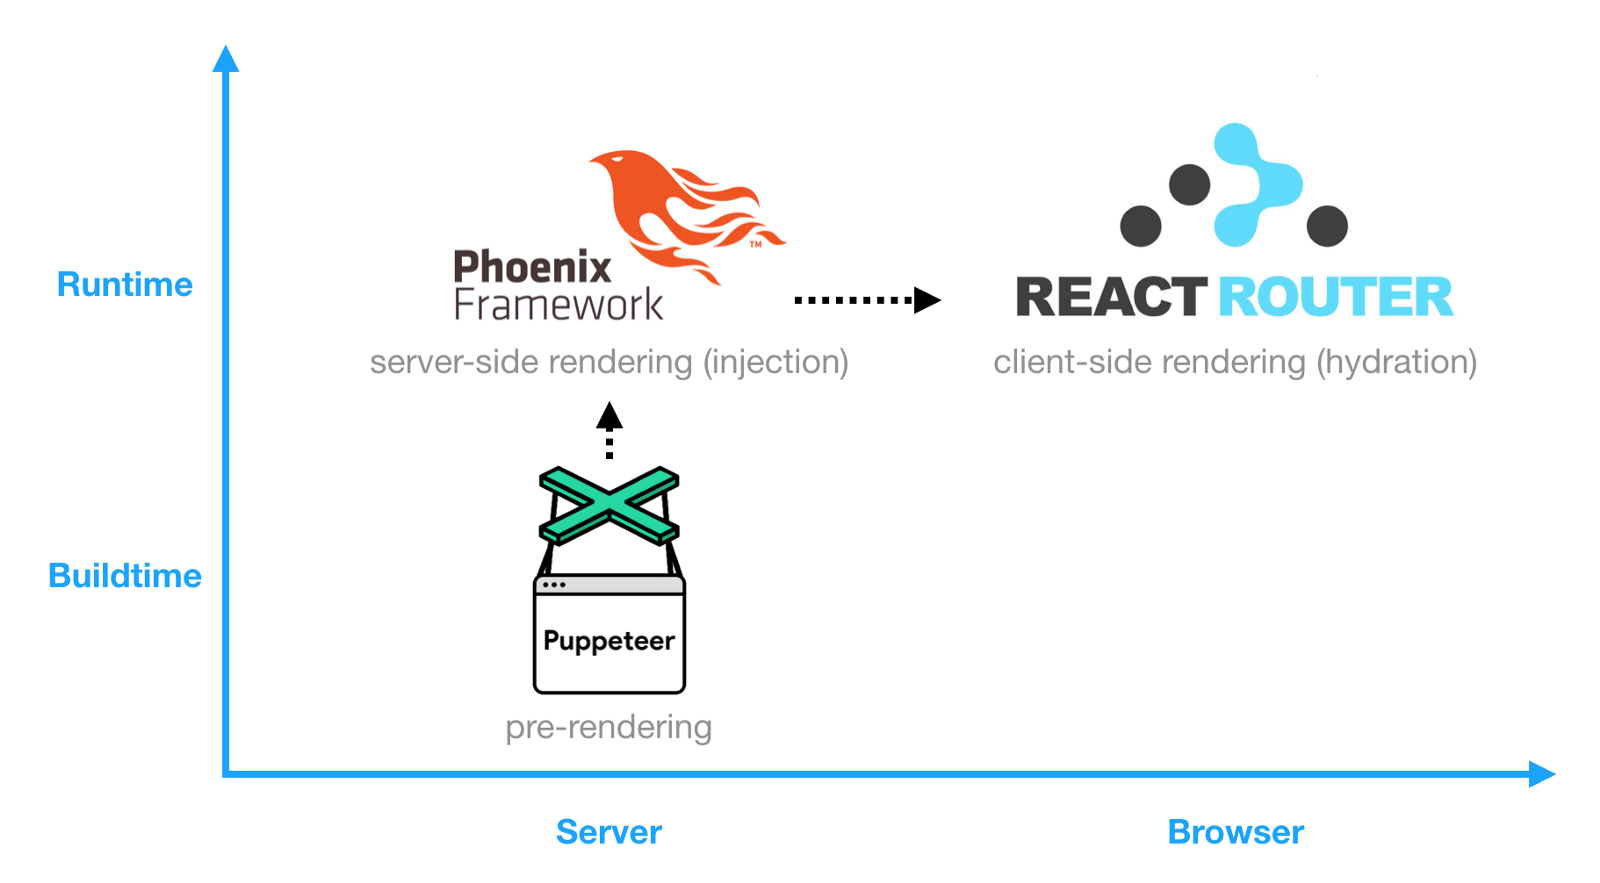 Puppeteer for pre-rendering and Phoenix for server-side rendering